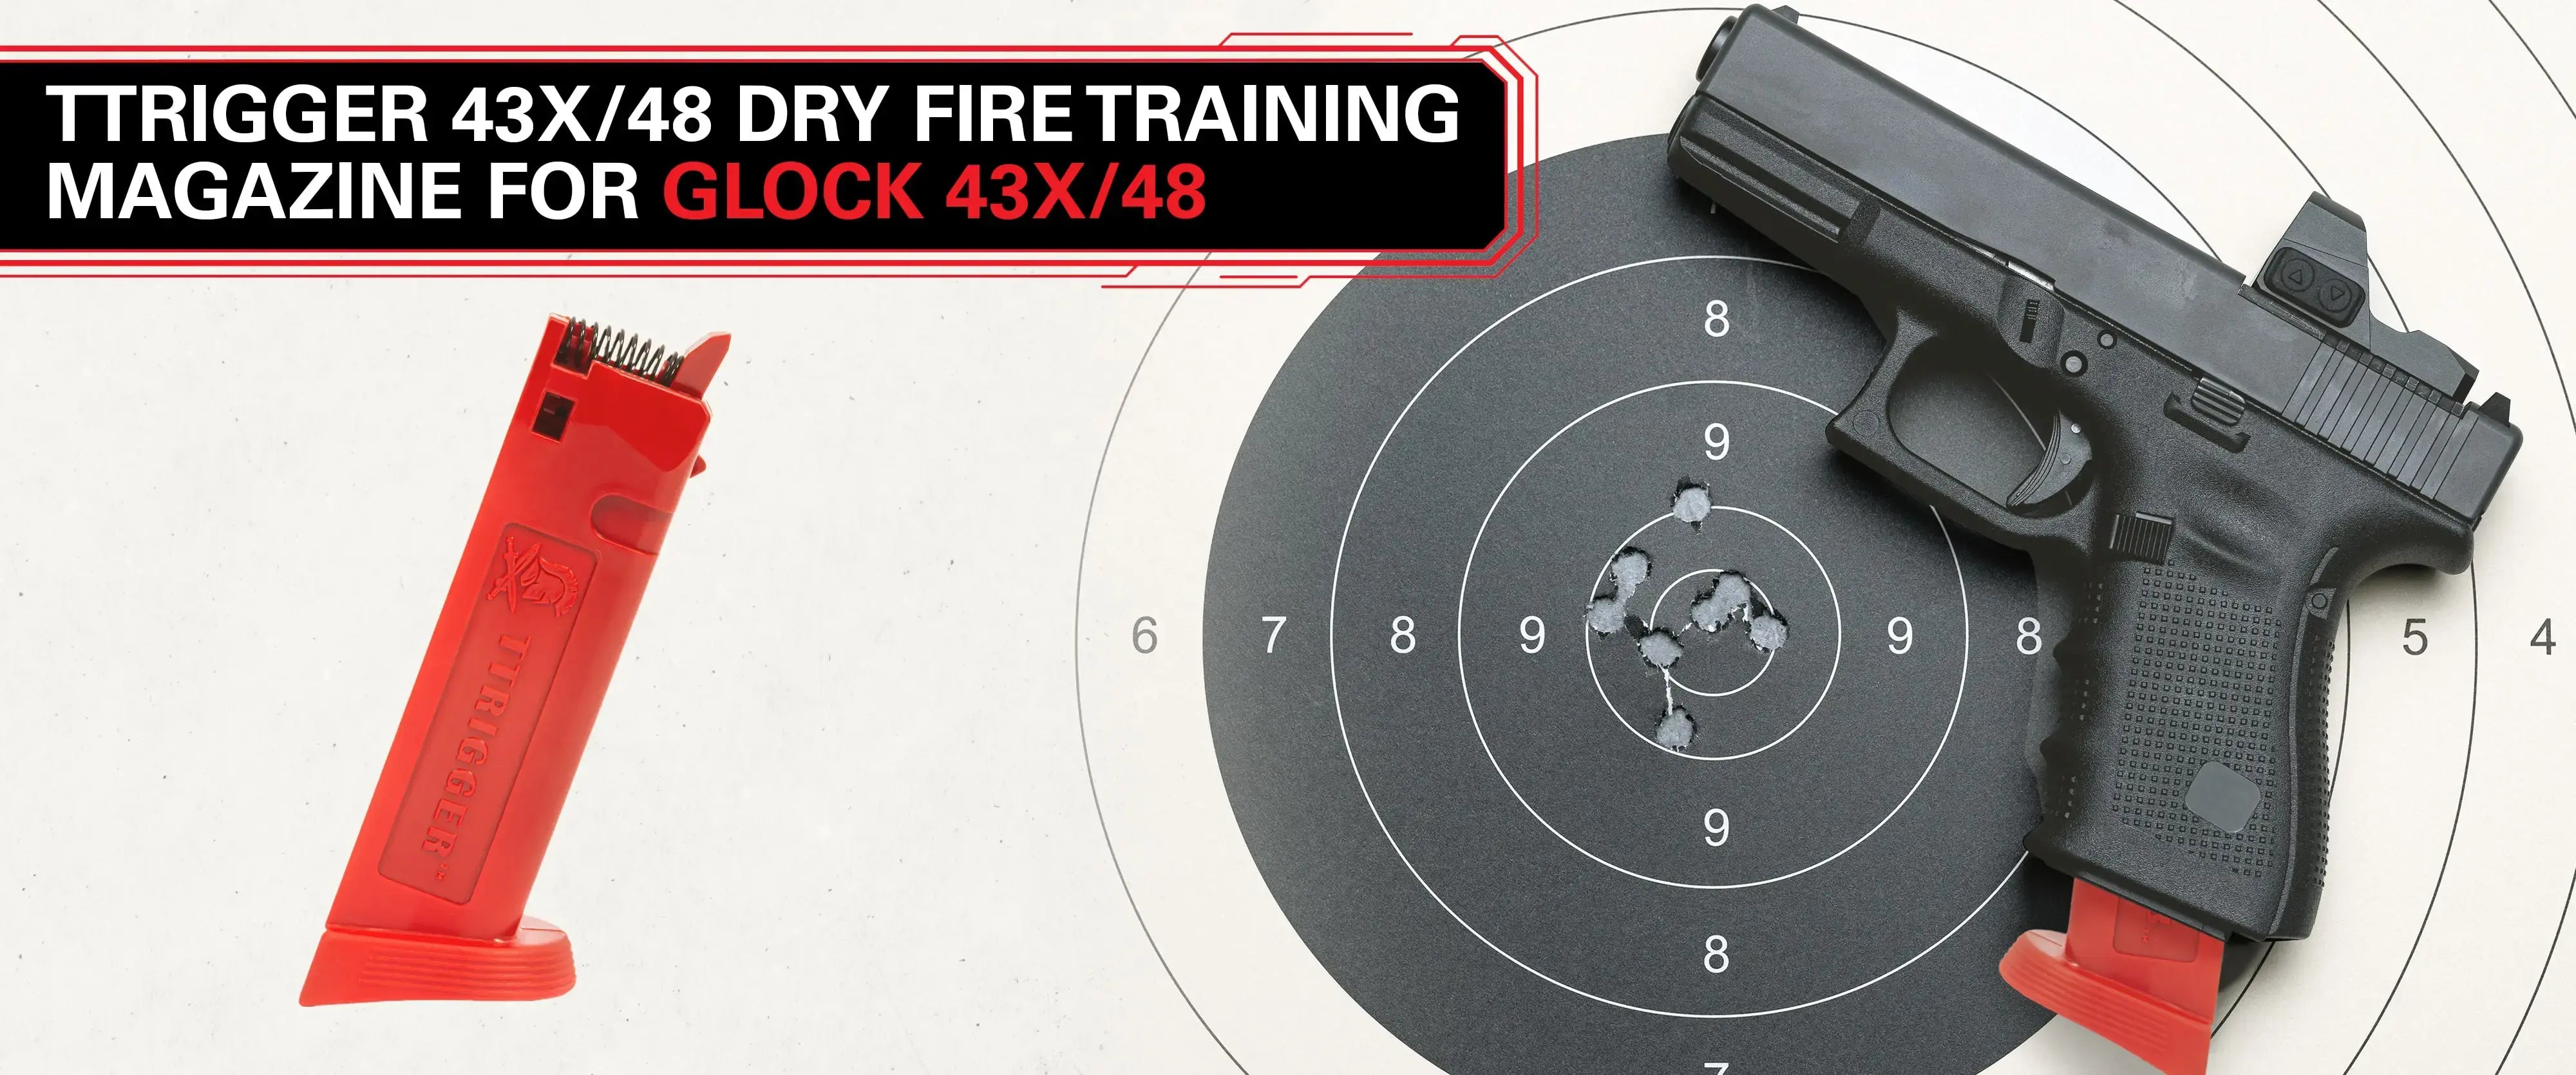 Dry Fire Training Magazine for Glock 43X38 by TTrigger